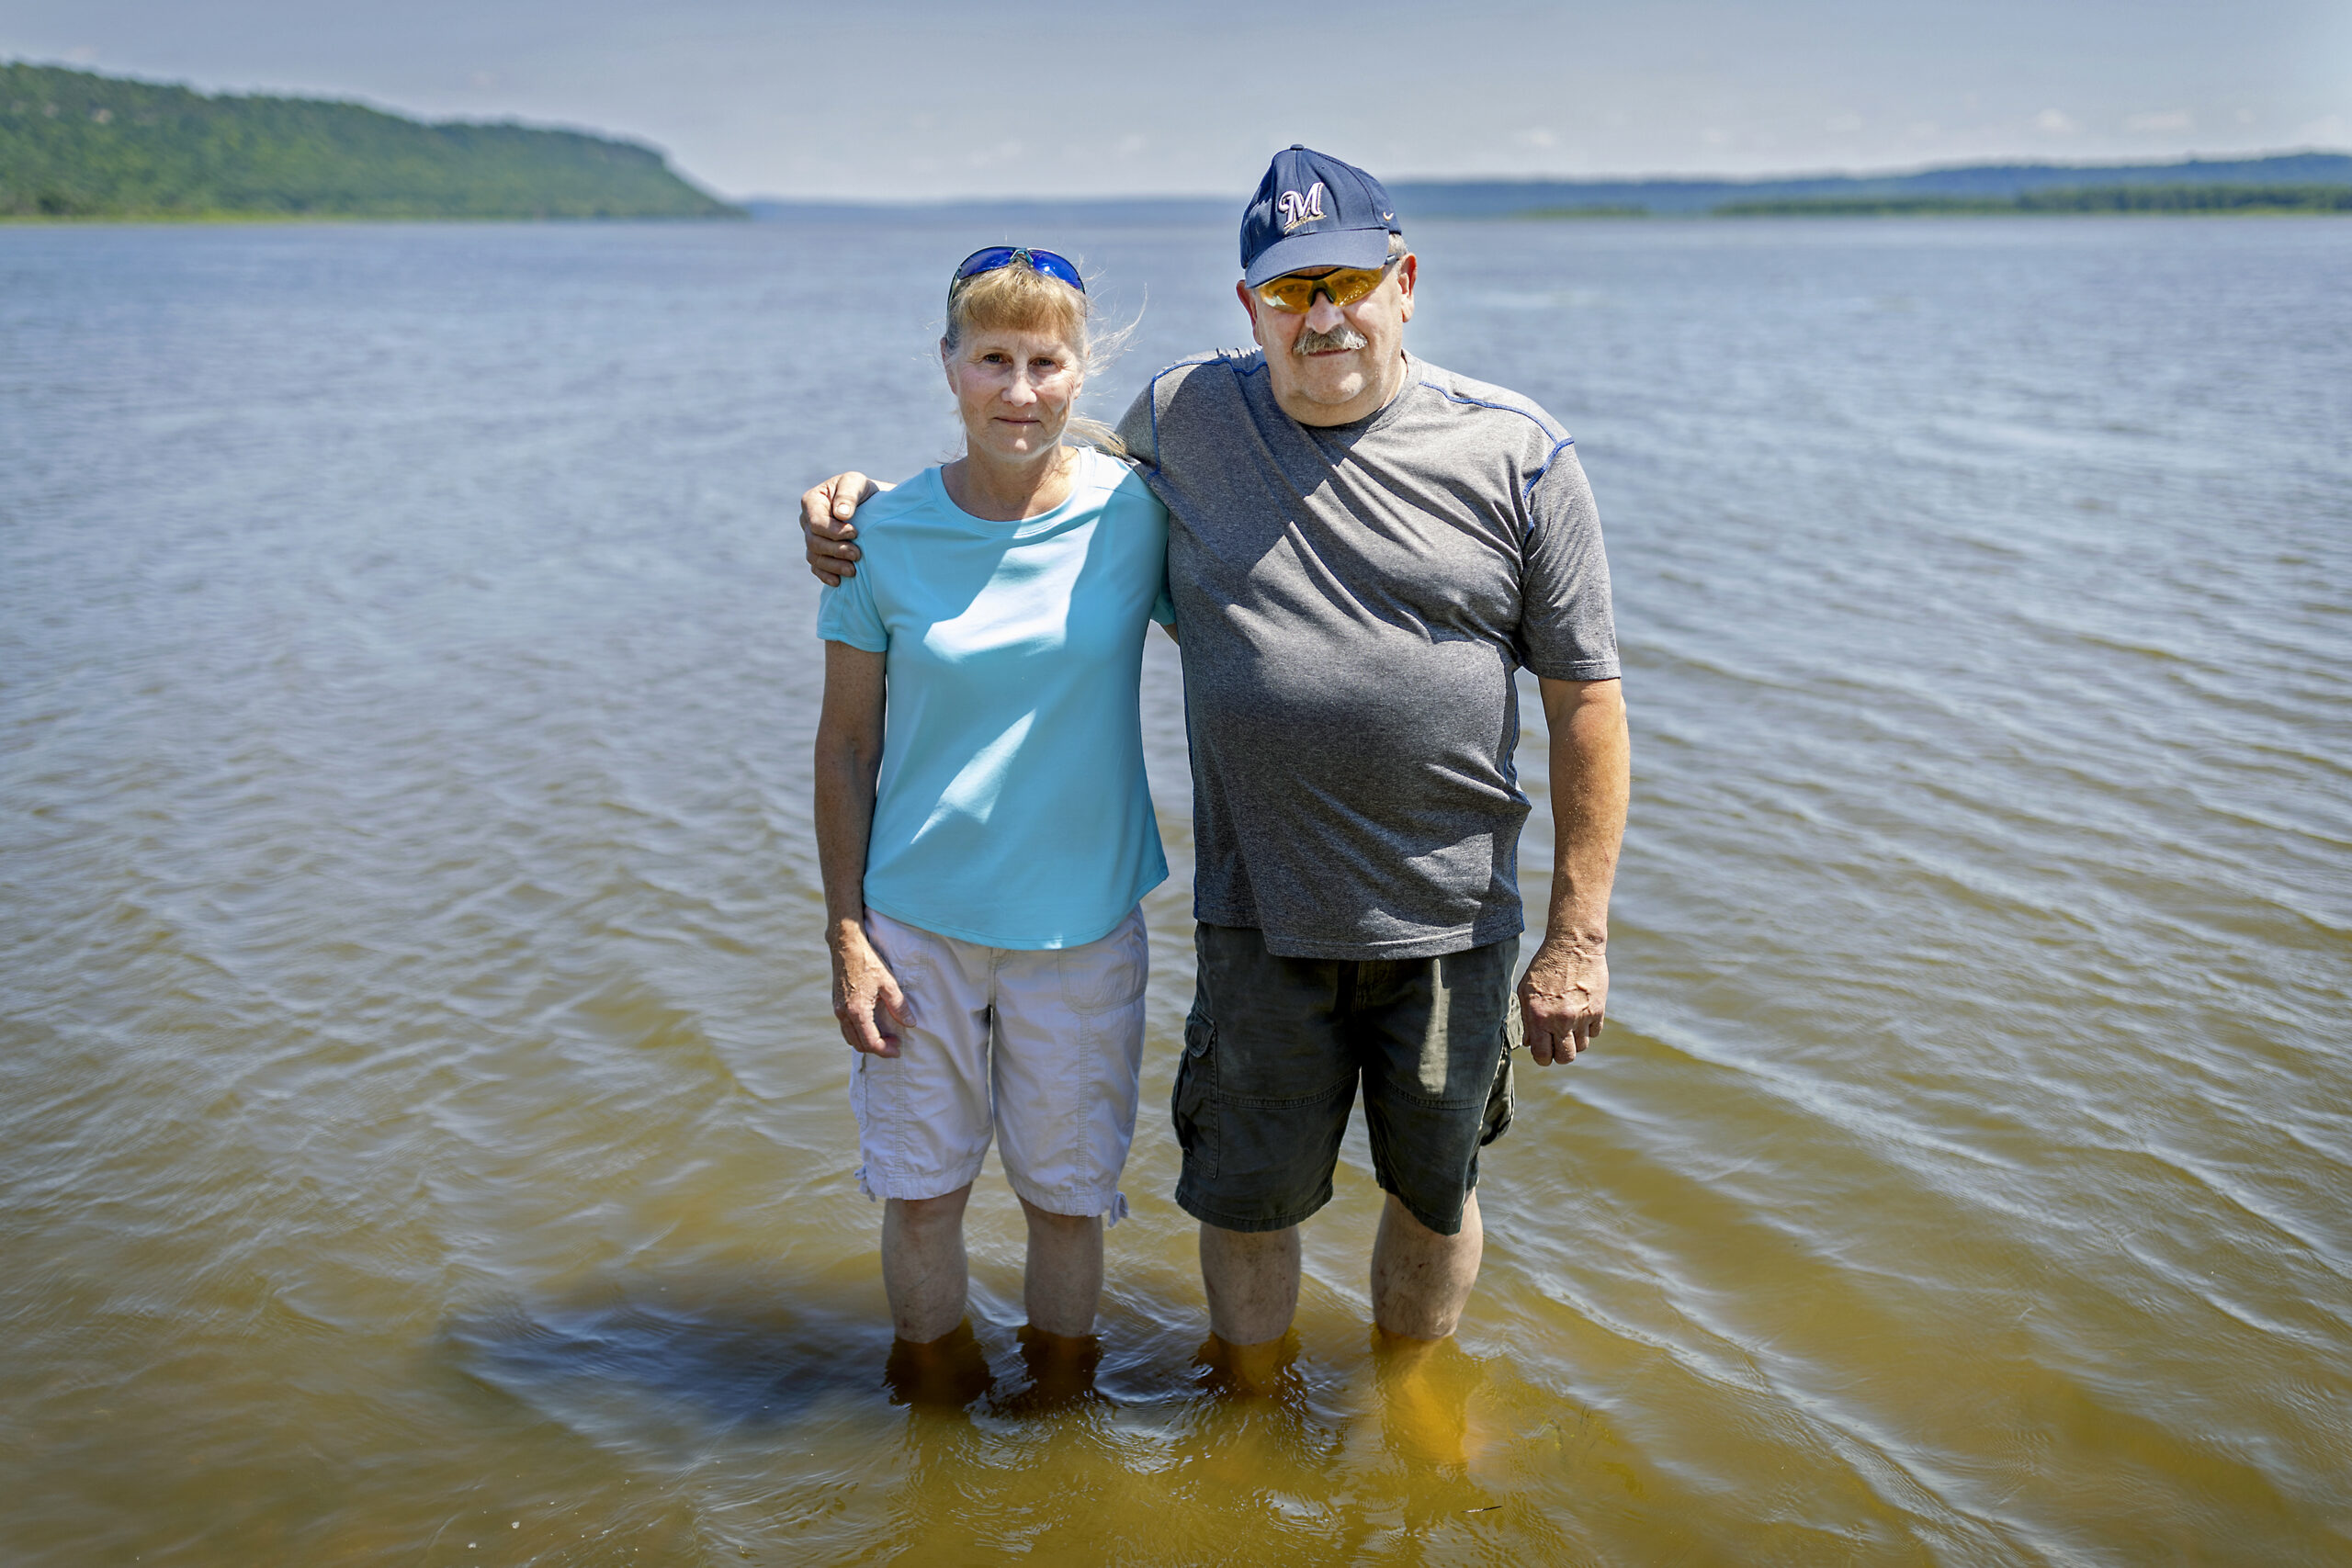 Frank and Cathy Dosdall stand in the water near a beach that should be filled with people in Bay City, a small Wisconsin town about an hour southeast of the Twin Cities